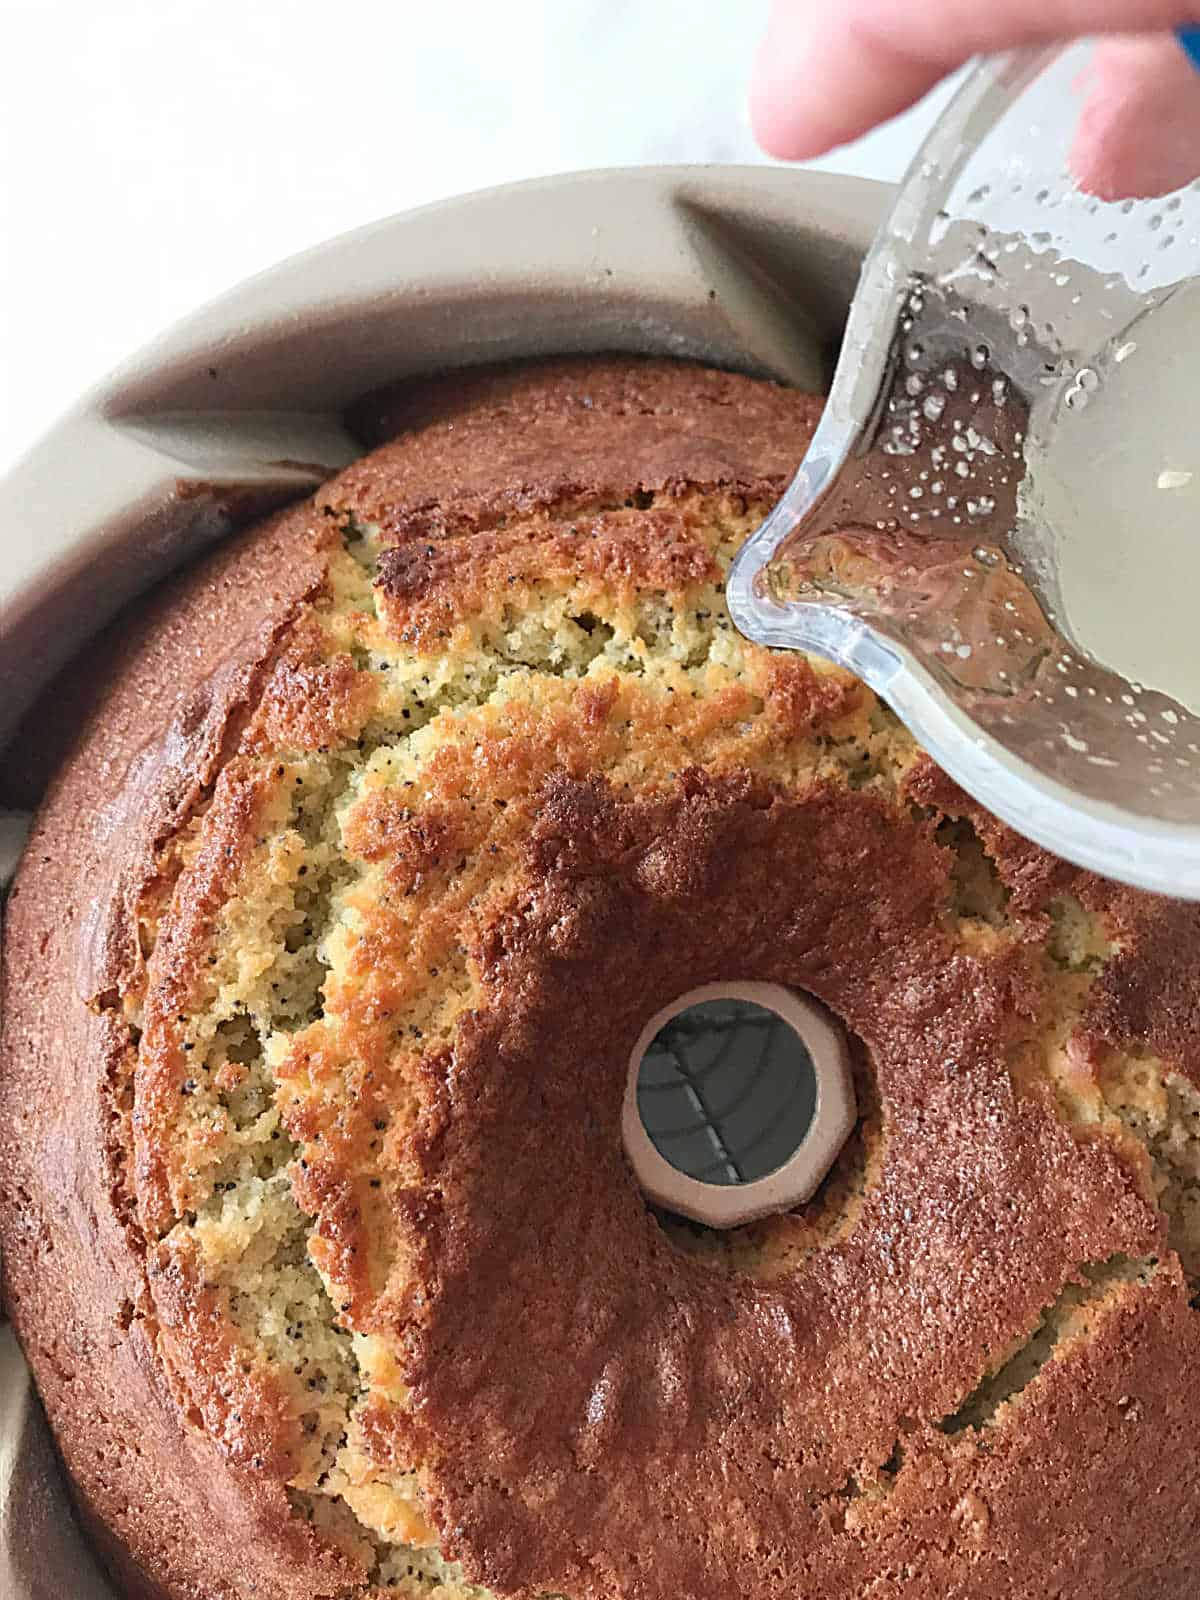 Pouring syrup over baked lemon poppy bundt cake in the pan.